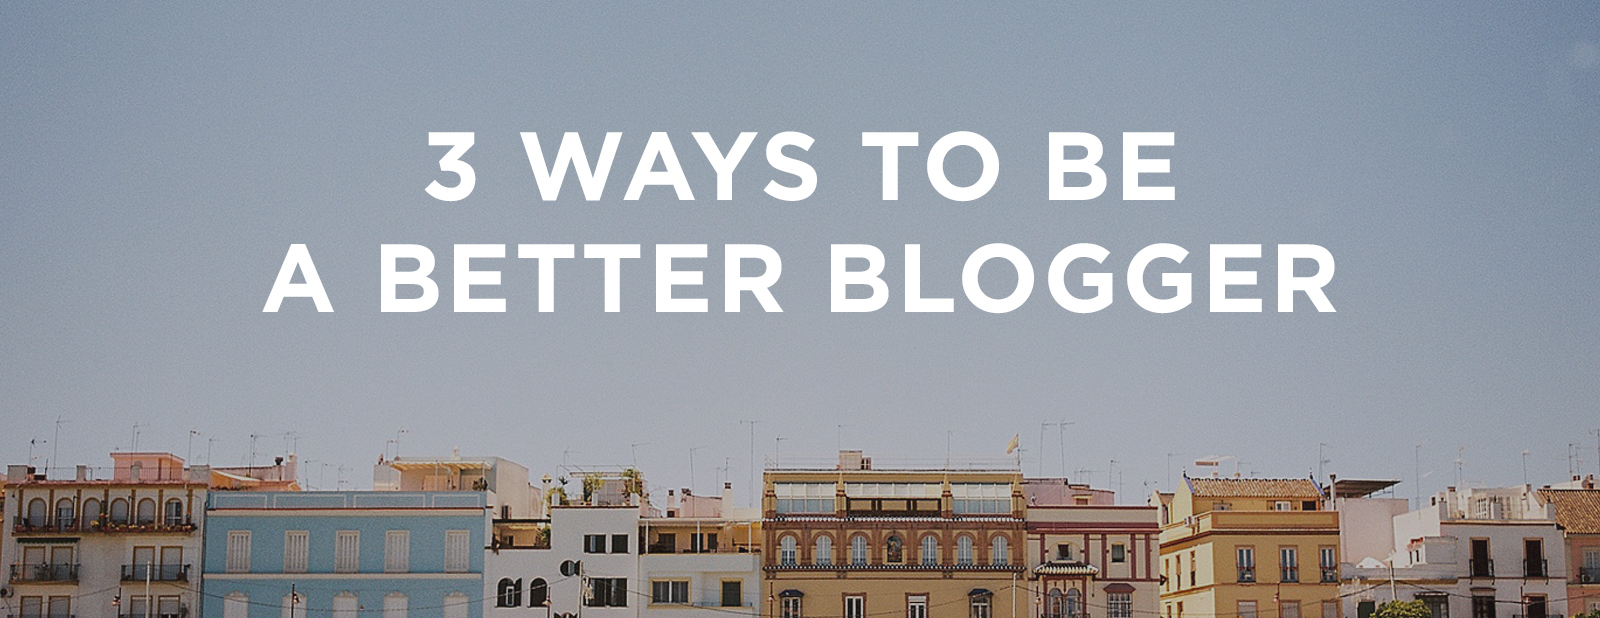 Be a better blogger | via the Rising Tide Society